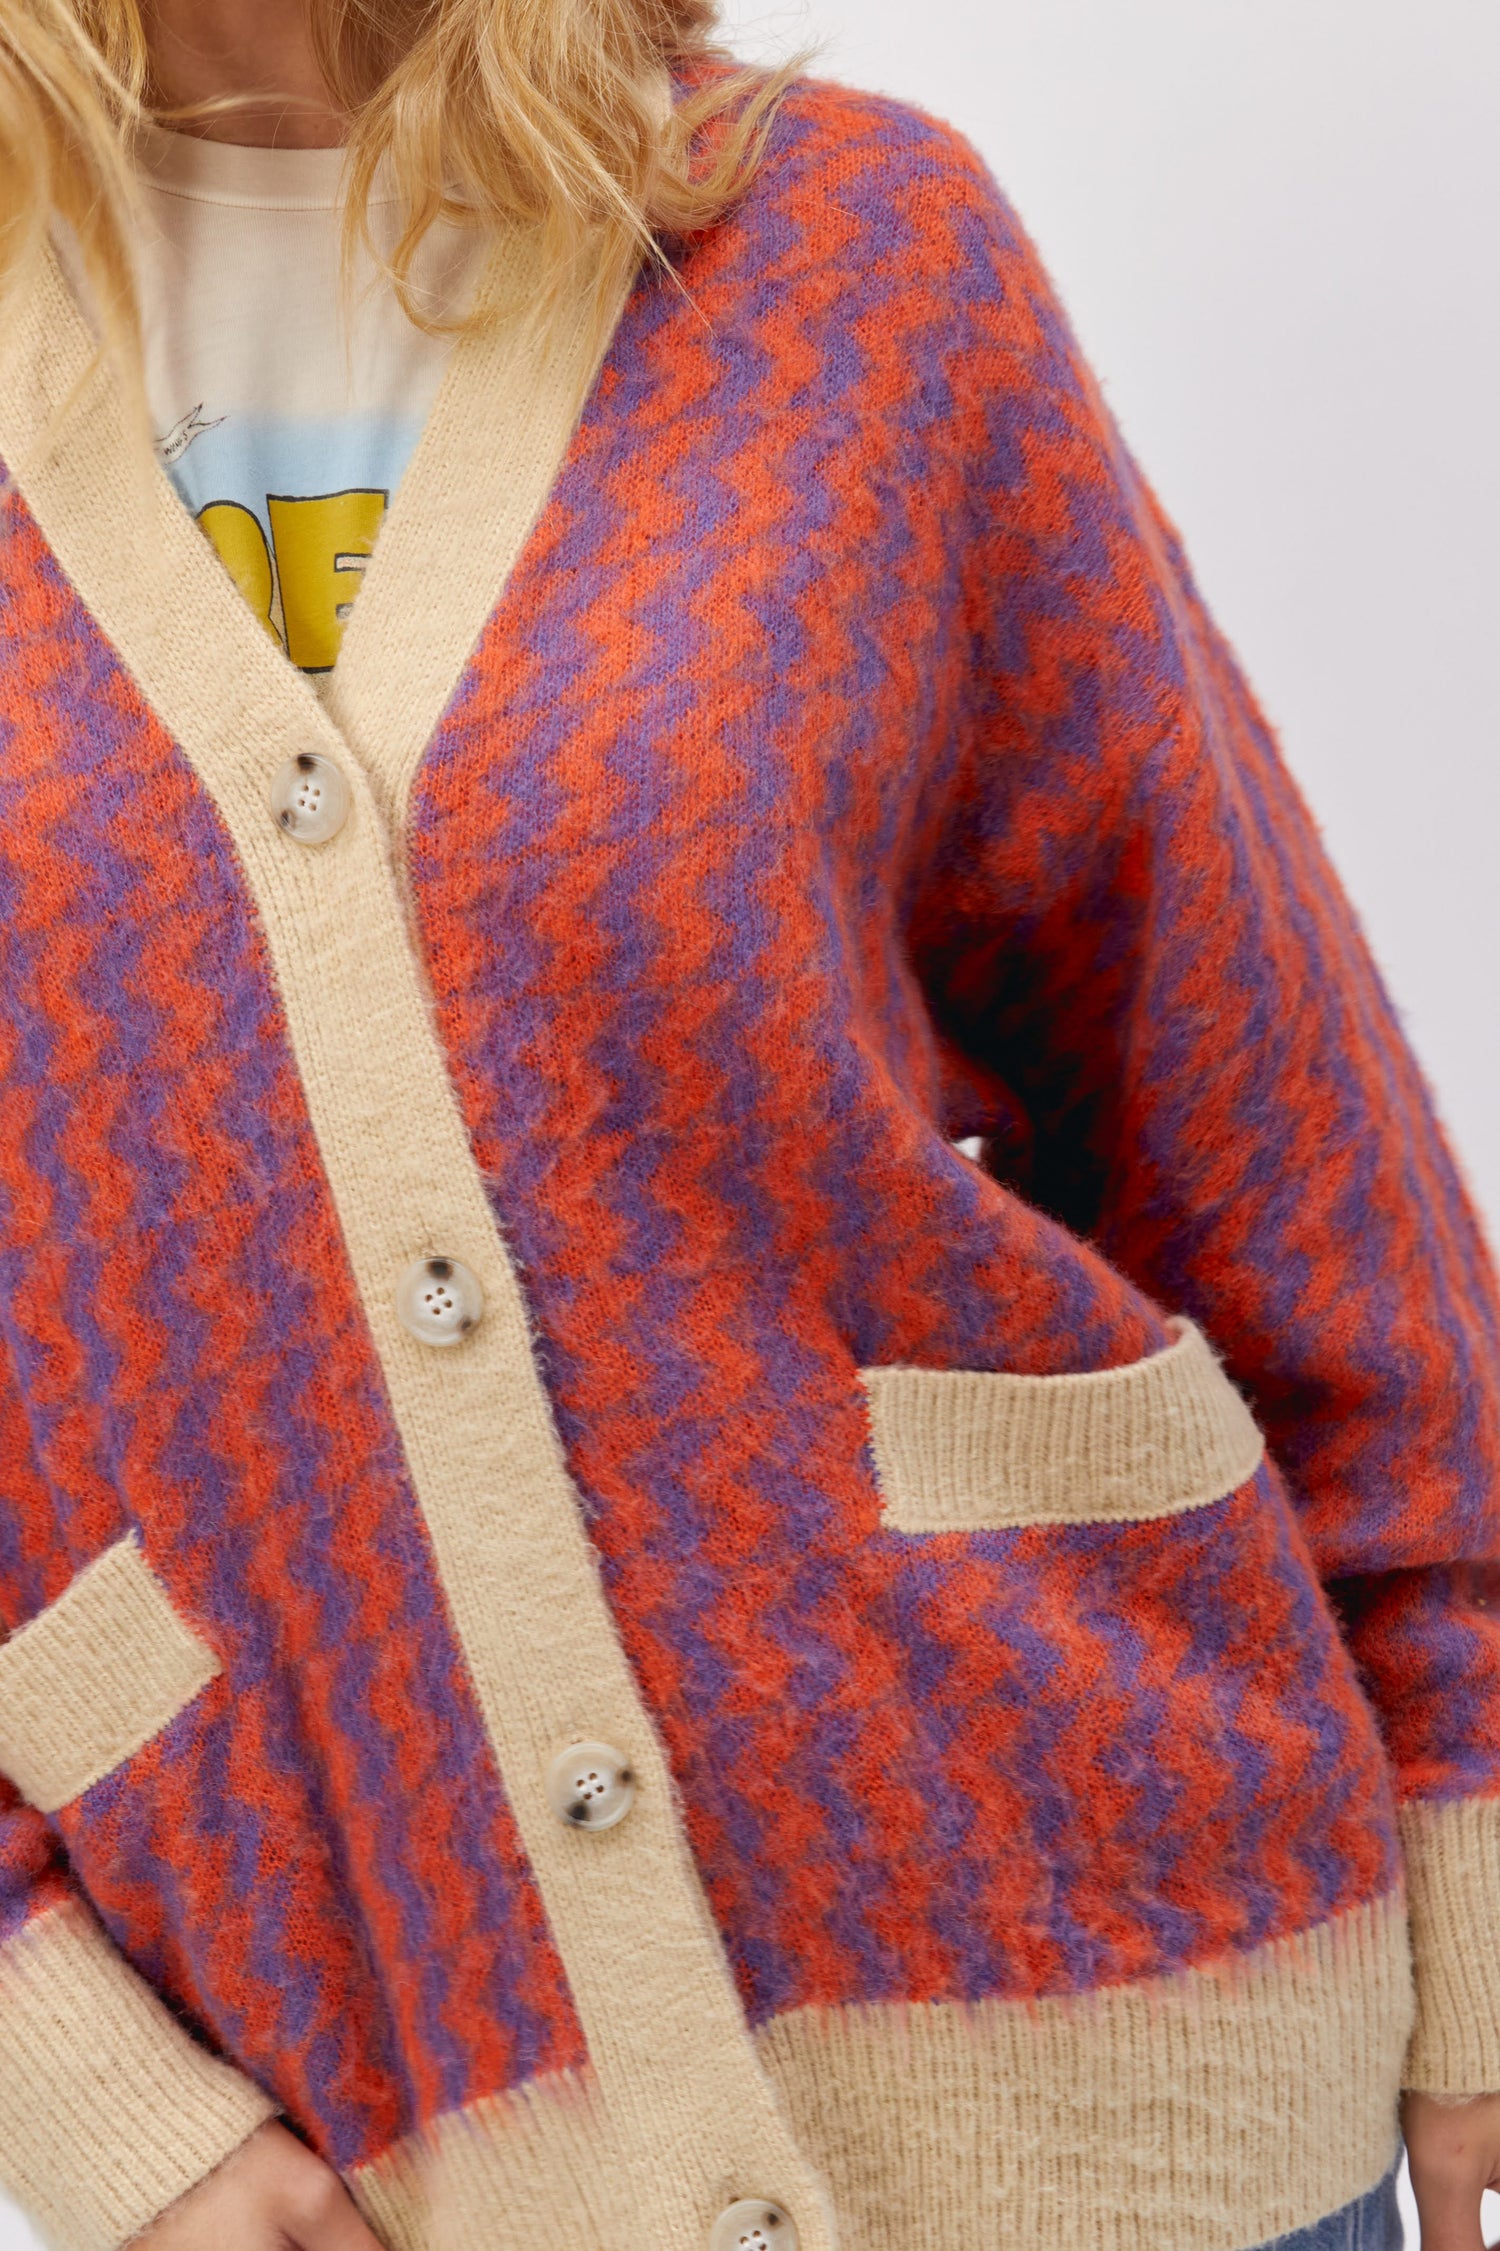 A blonde-haired model featuring a violet orange zig zag cardigan.